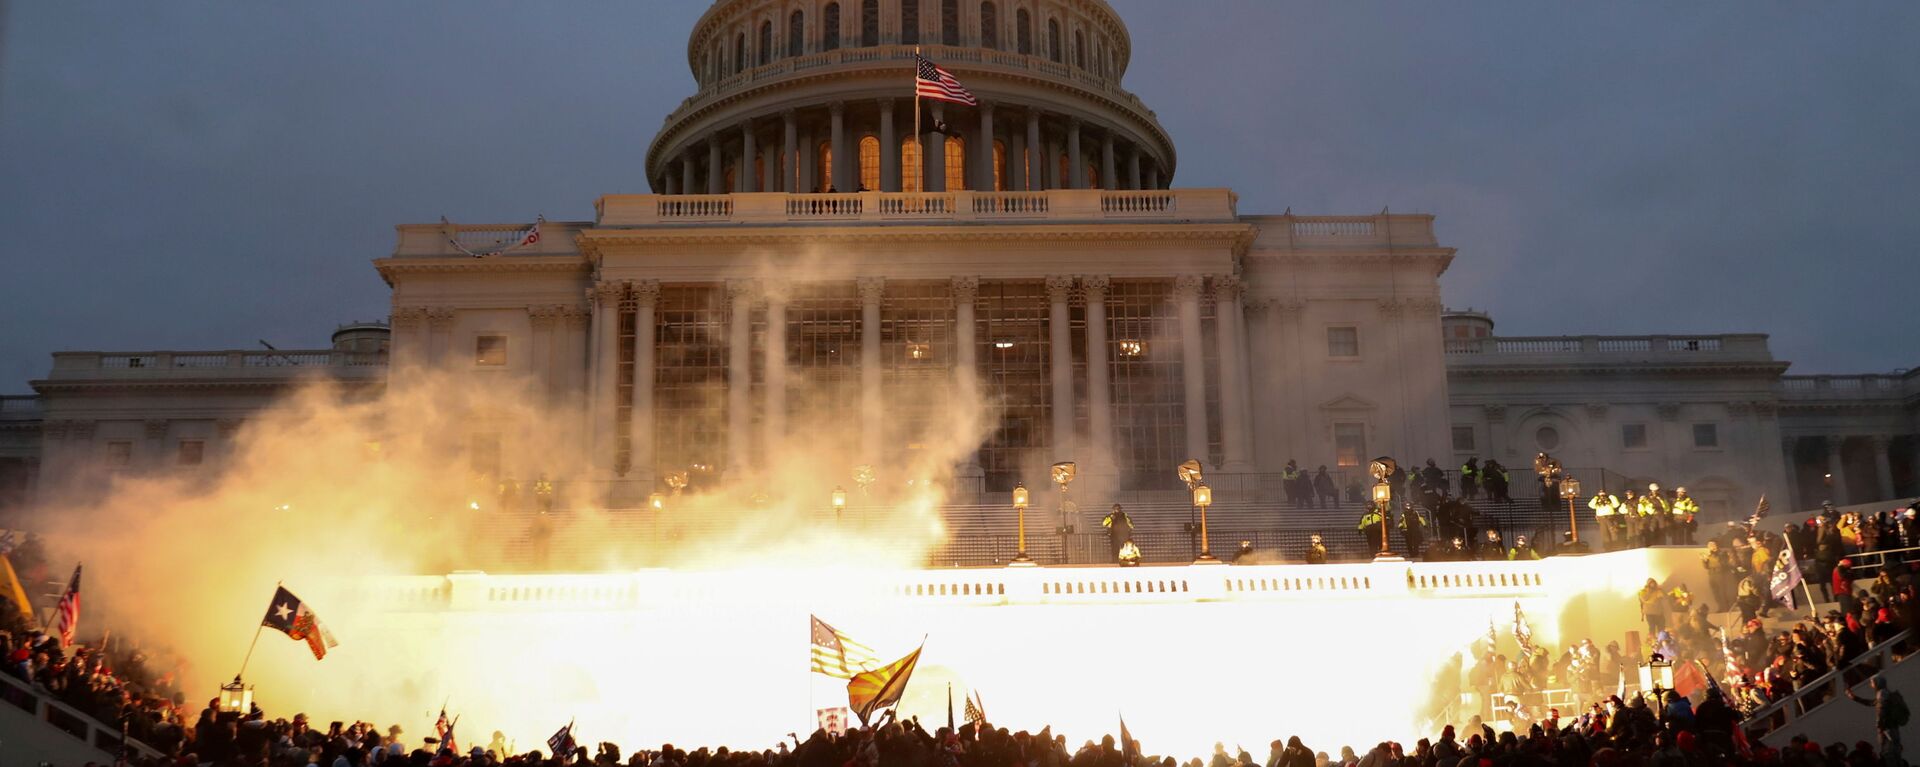 An explosion caused by a police munition is seen while supporters of U.S. President Donald Trump gather in front of the U.S. Capitol Building in Washington, U.S., January 6, 2021. - Sputnik International, 1920, 16.12.2021